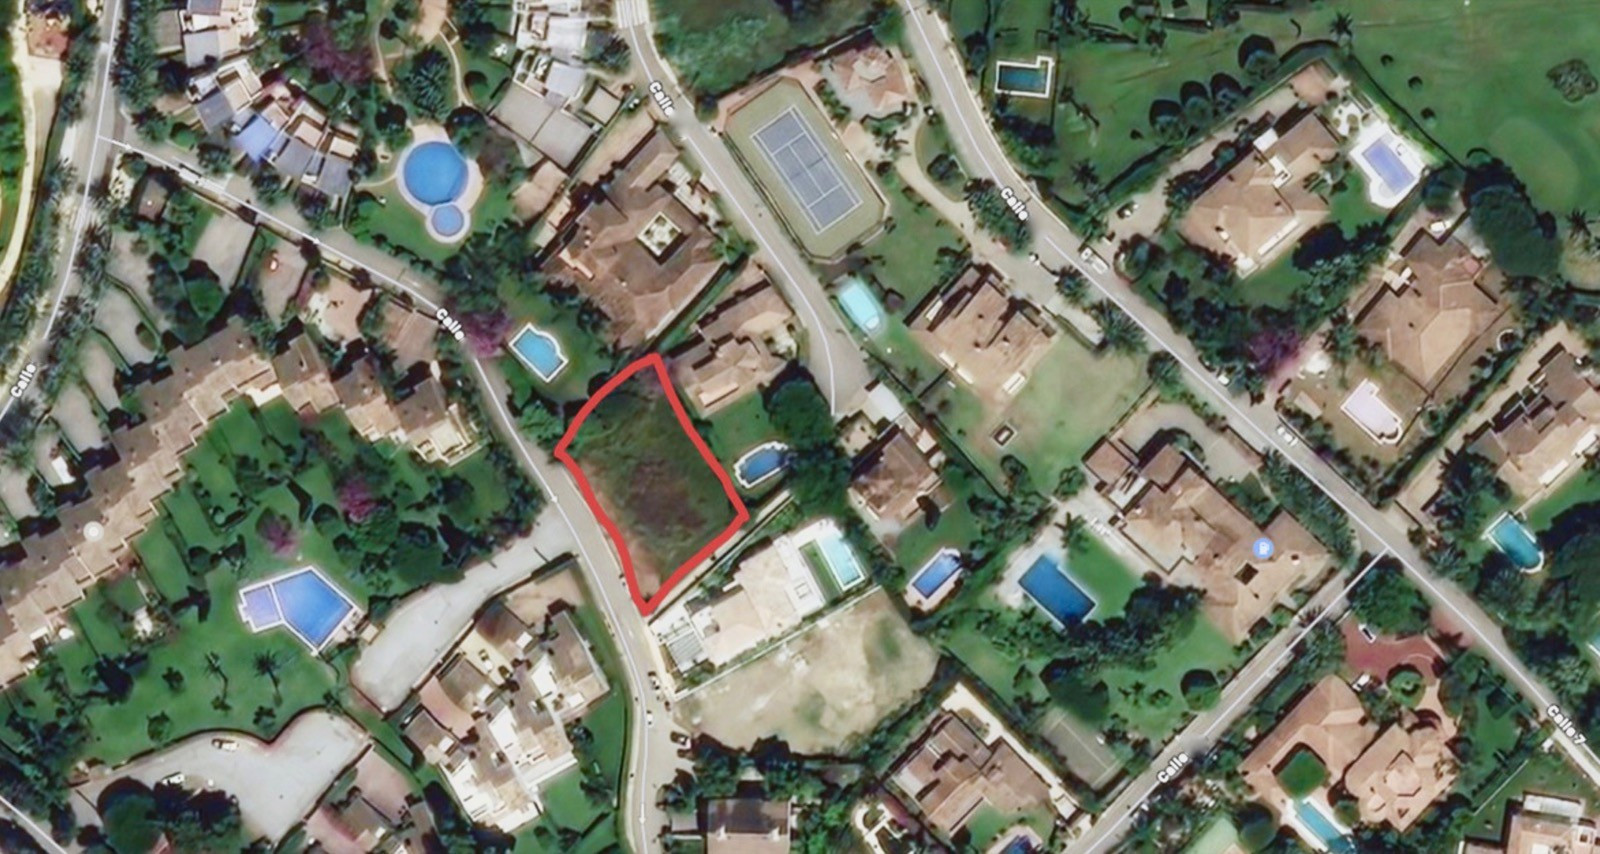 Plot with great villa project with license in place to start building immediately in Guadalmina Baja. Very hot deal!!!